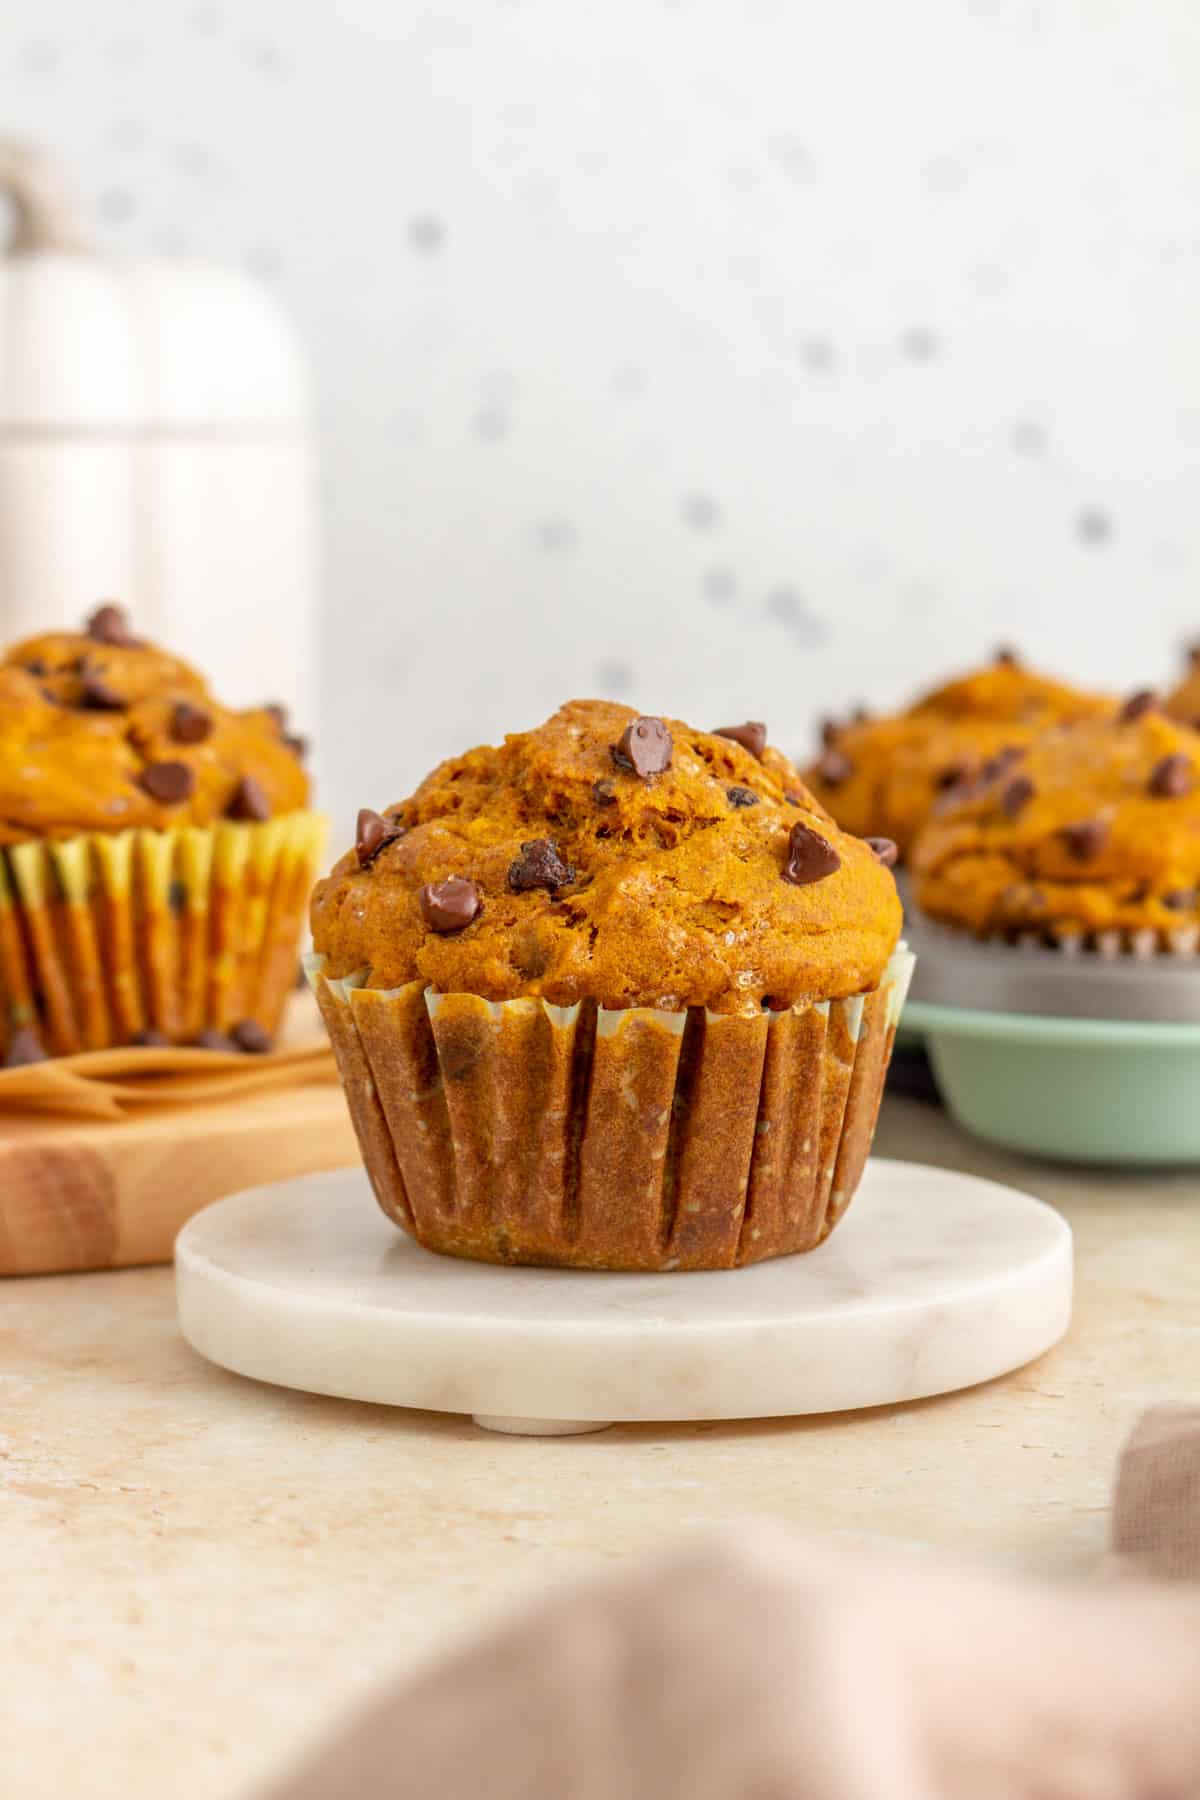 A pumpkin banana muffin on a marble coaster with more muffins in the background out of focus.